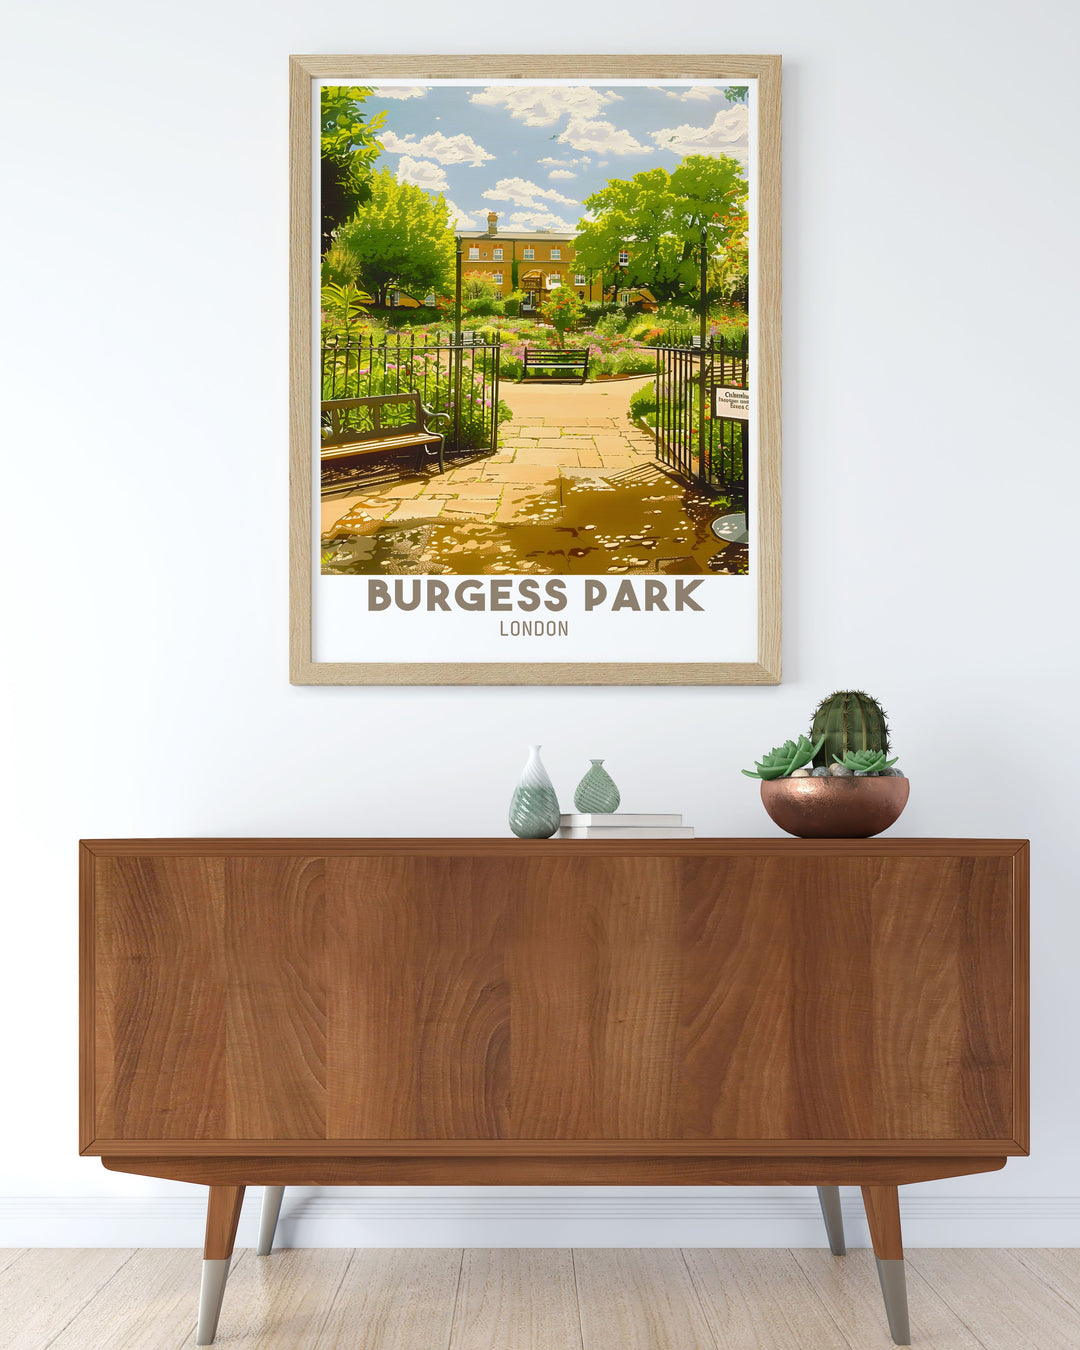 Experience the beauty of South East London with this stunning Burgess Park print. The artwork features the lush Chumleigh Gardens and the cozy Chumleigh Café, capturing the essence of this urban oasis and its vibrant atmosphere.